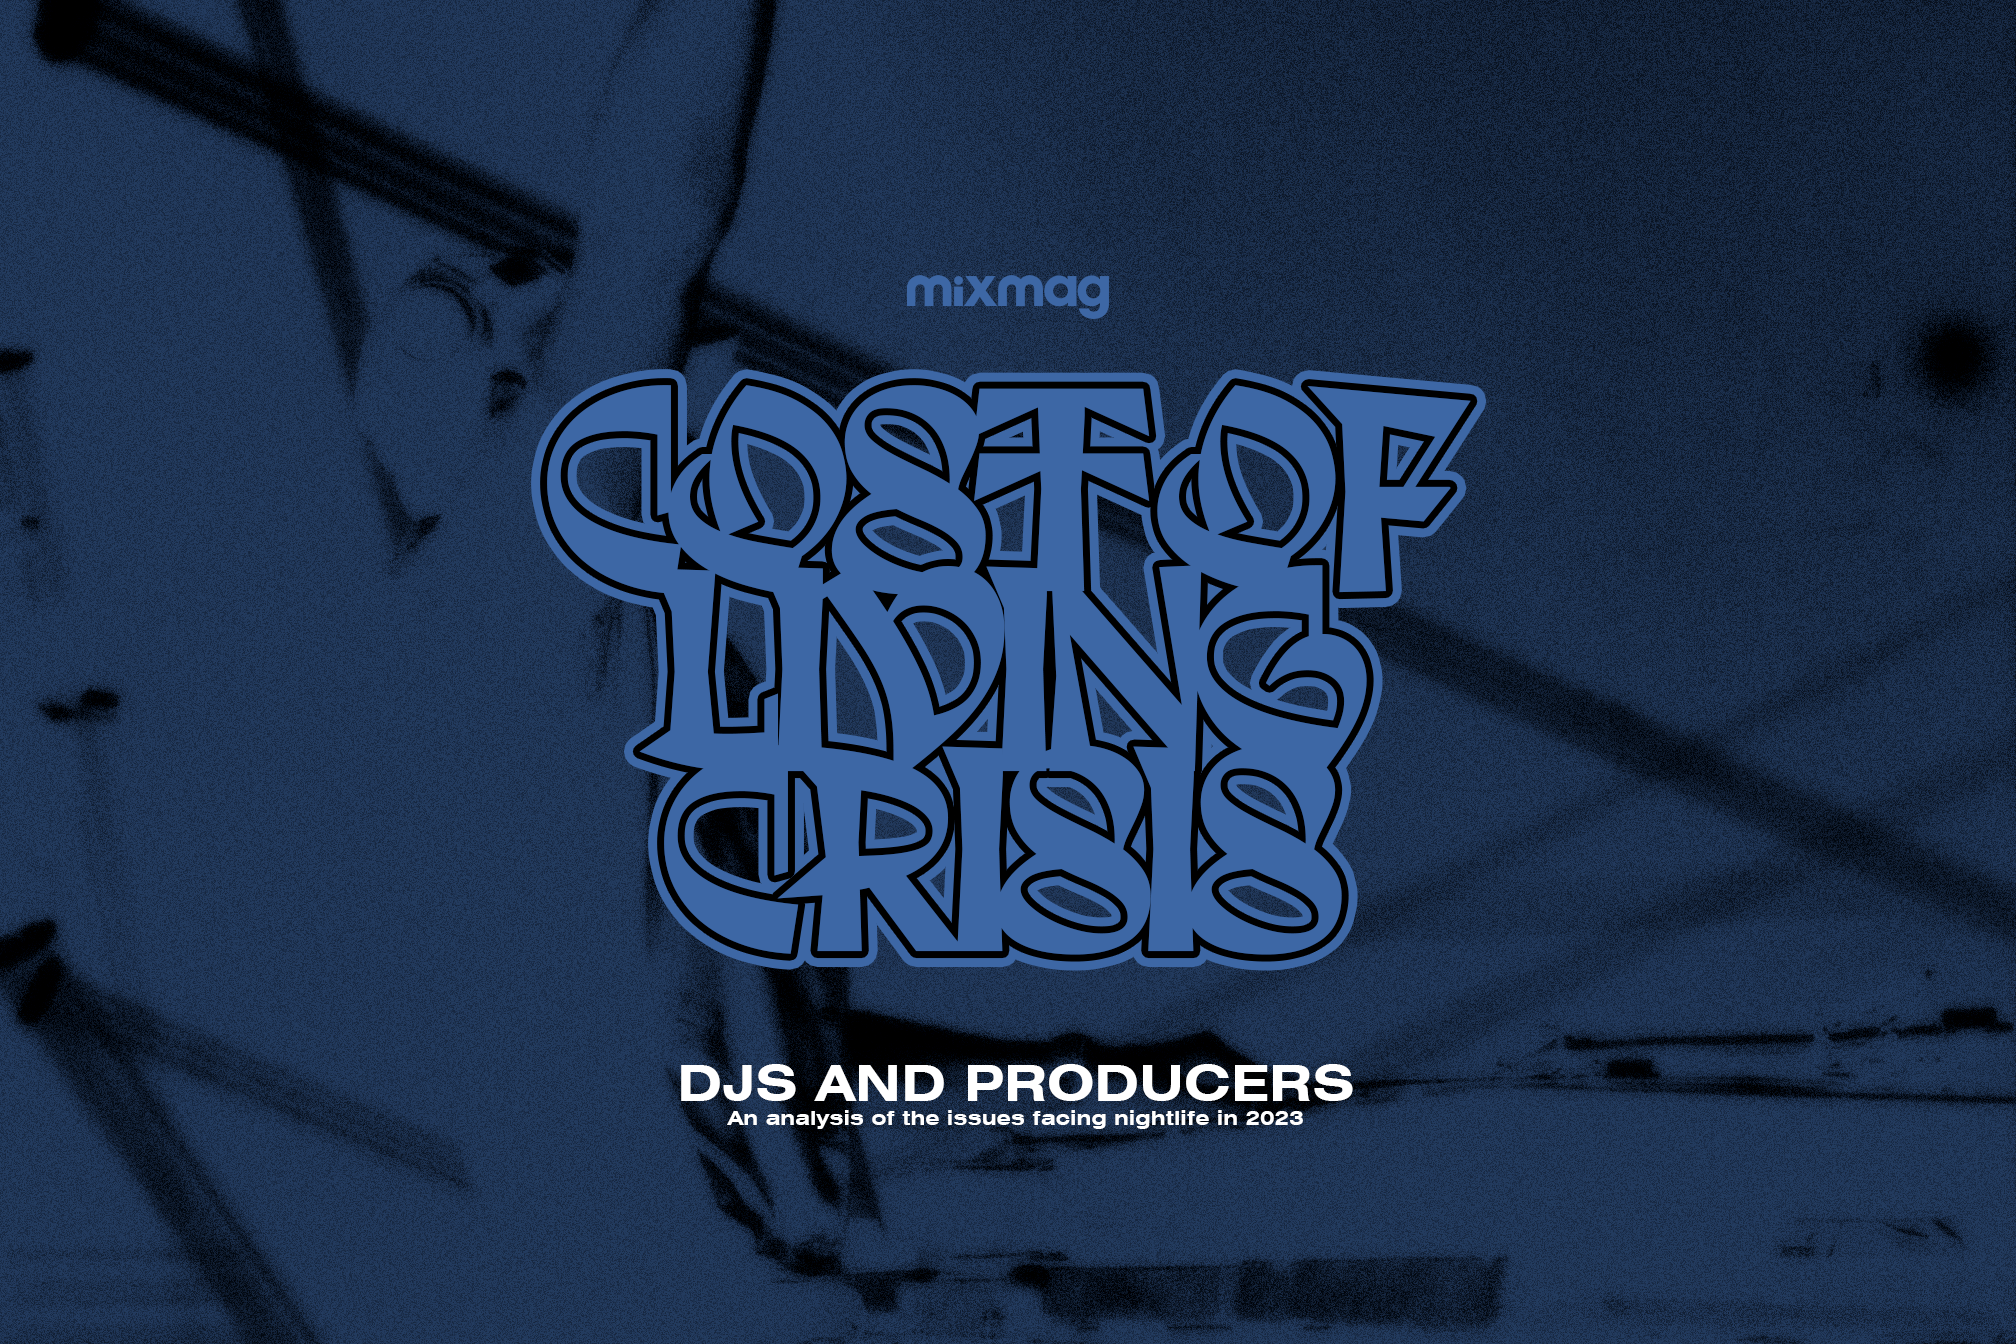 How The Cost Of Living Crisis Is Impacting DJs And Producers - Features